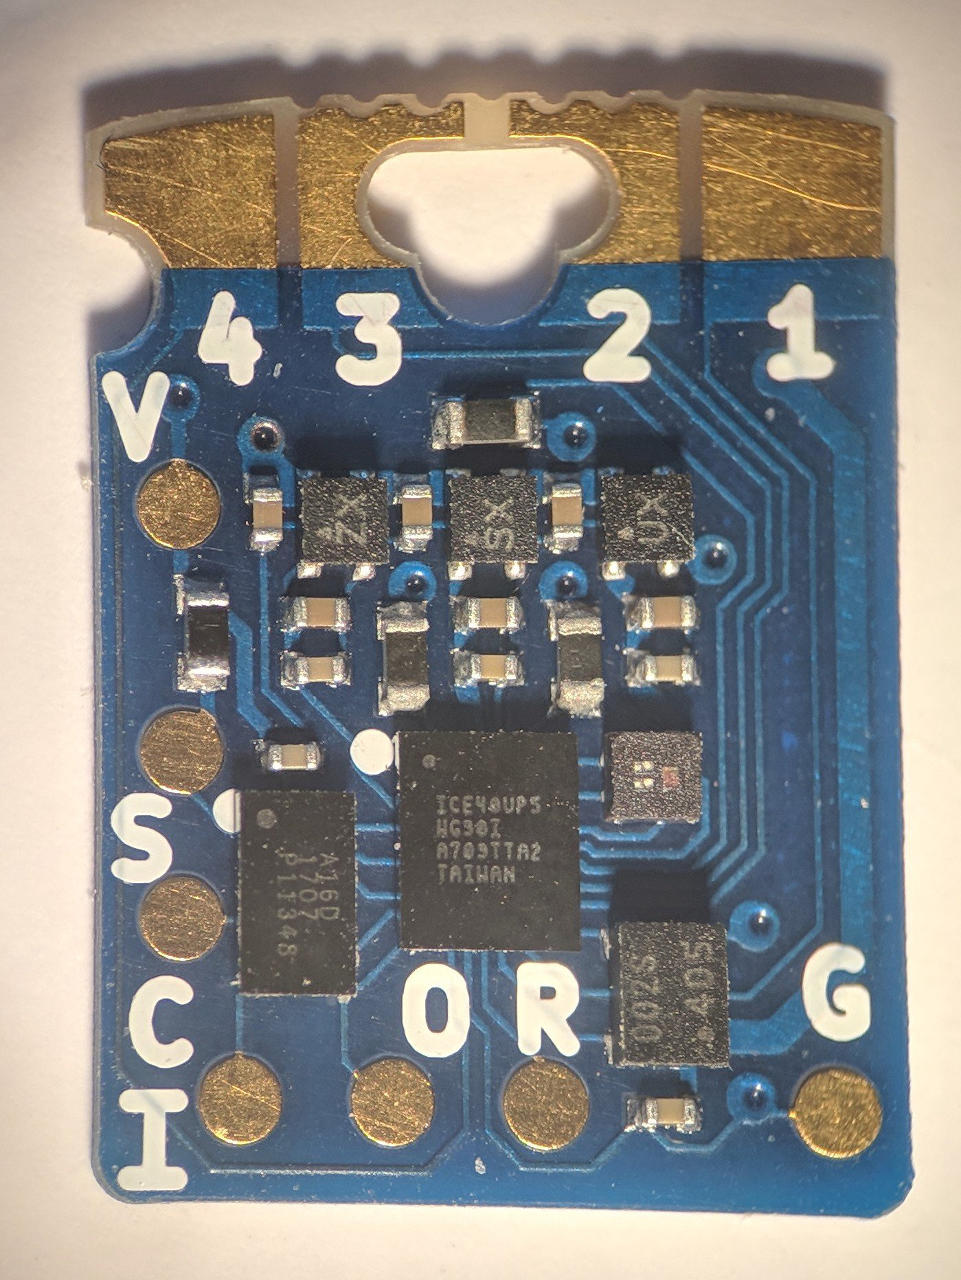 A photo of the board component side. There are seven integrated circuits and bare copper pads labelled clockwise from the top left 4, 3, 2, 1, G, R, O, I, C, S and V.